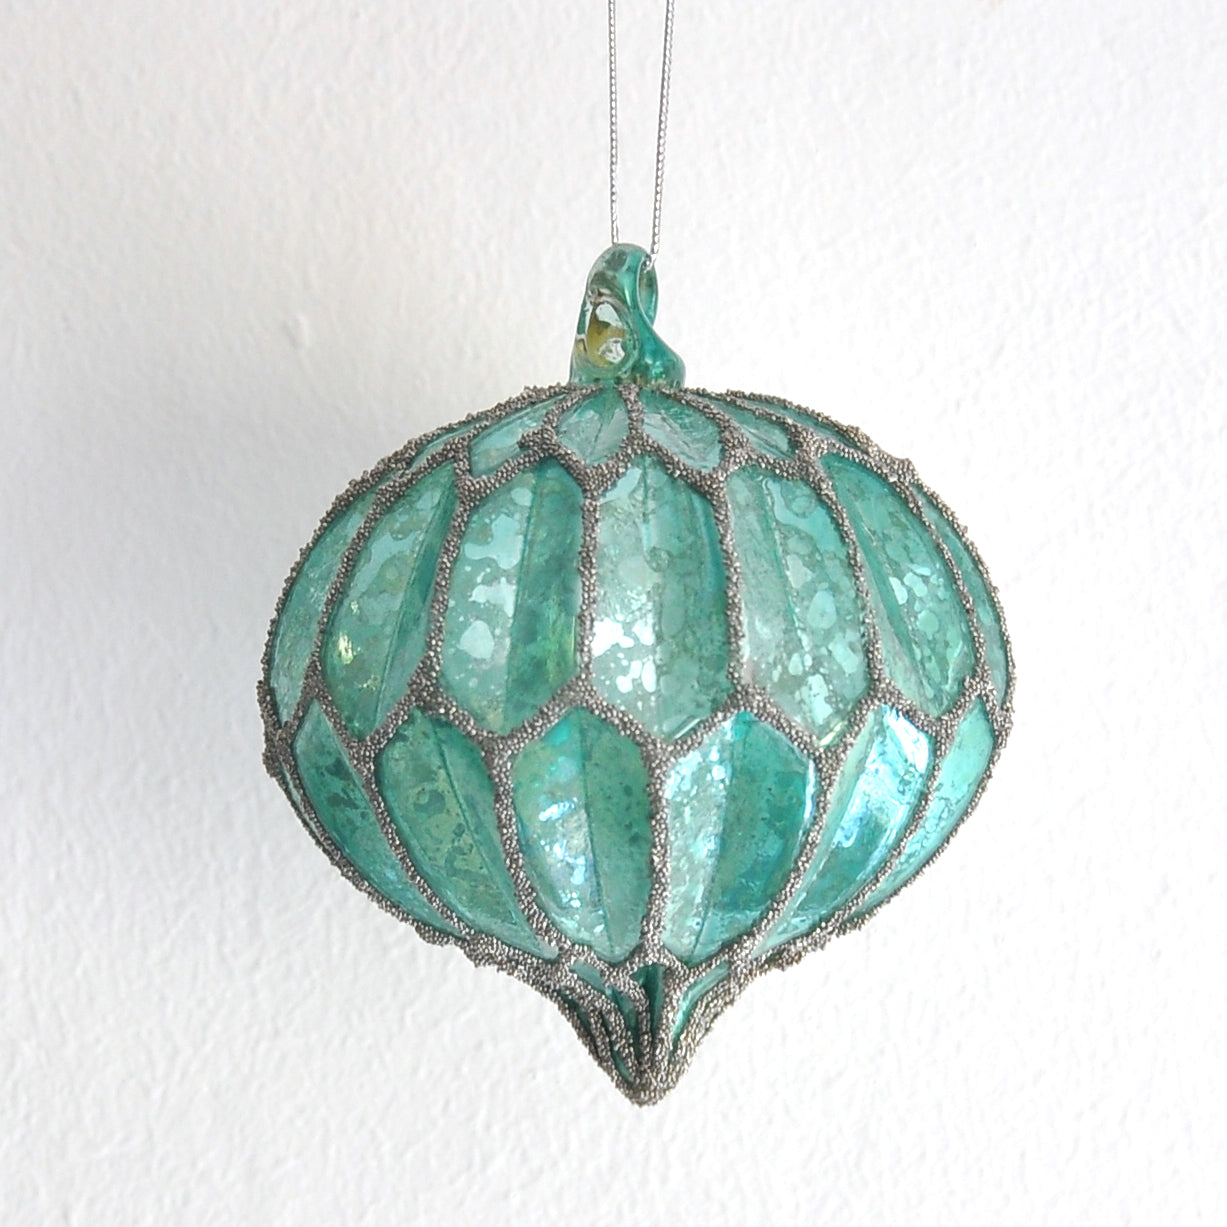 Antique-style Turquoise Christmas Tree Decoration with silver glitter detail